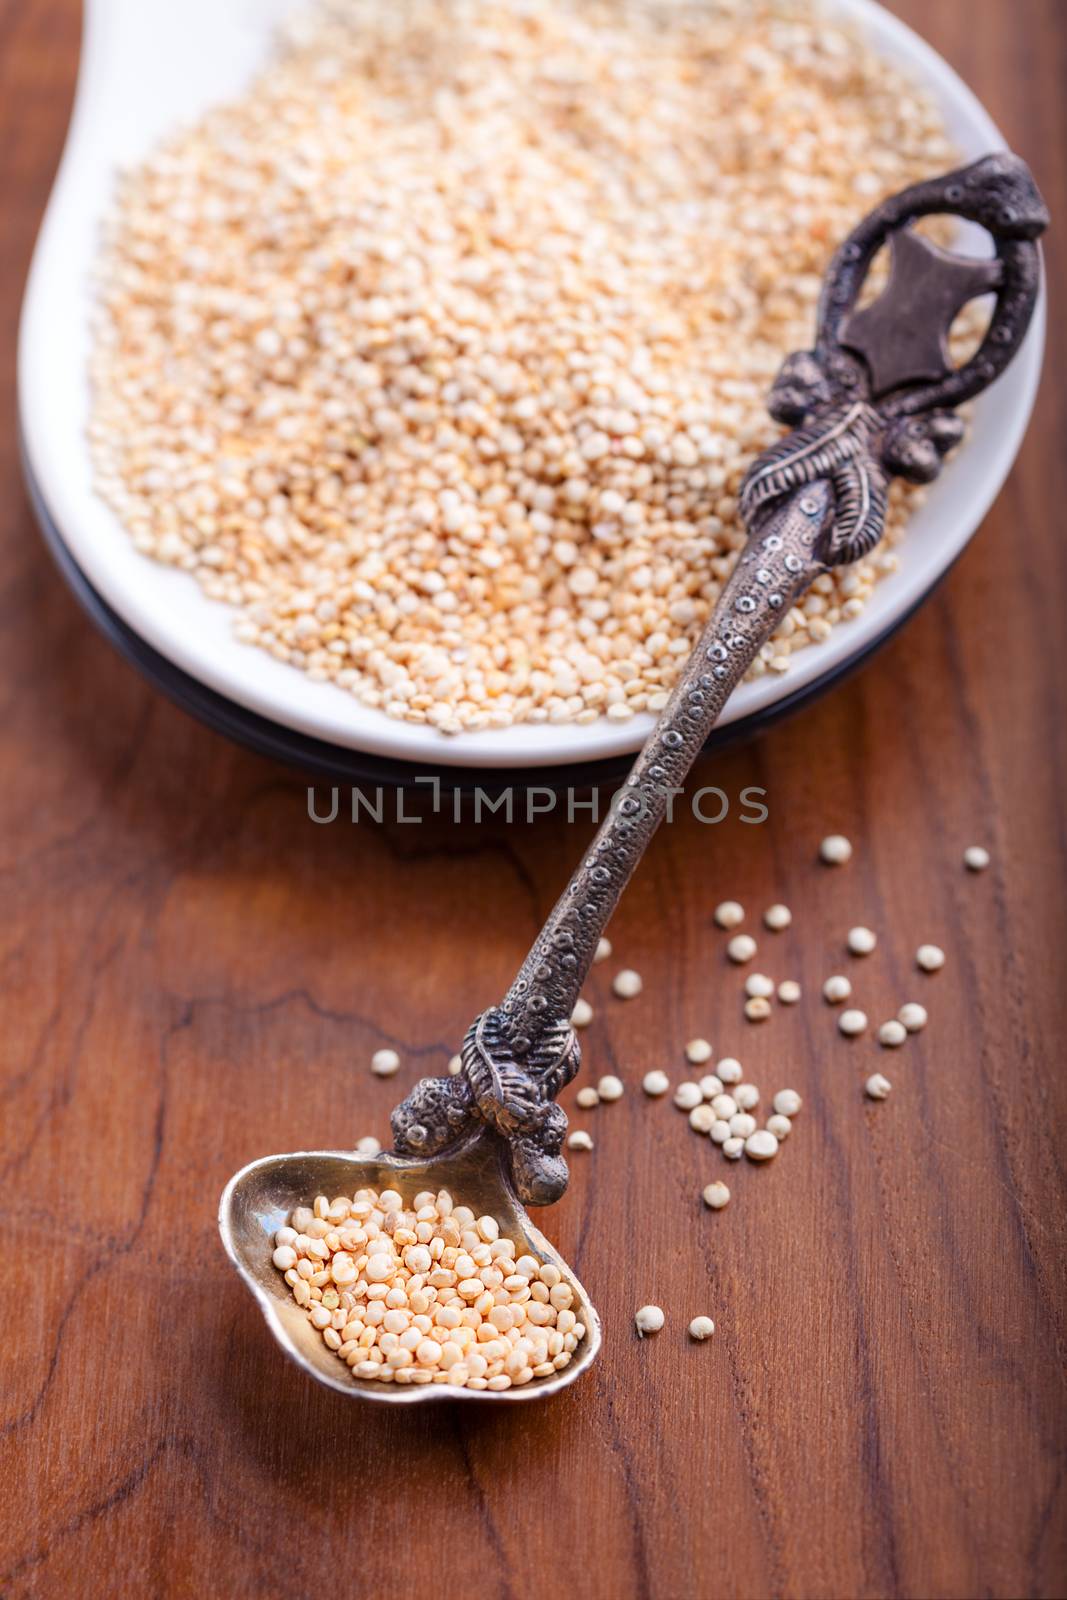 Raw Quinoa on Wood  by supercat67